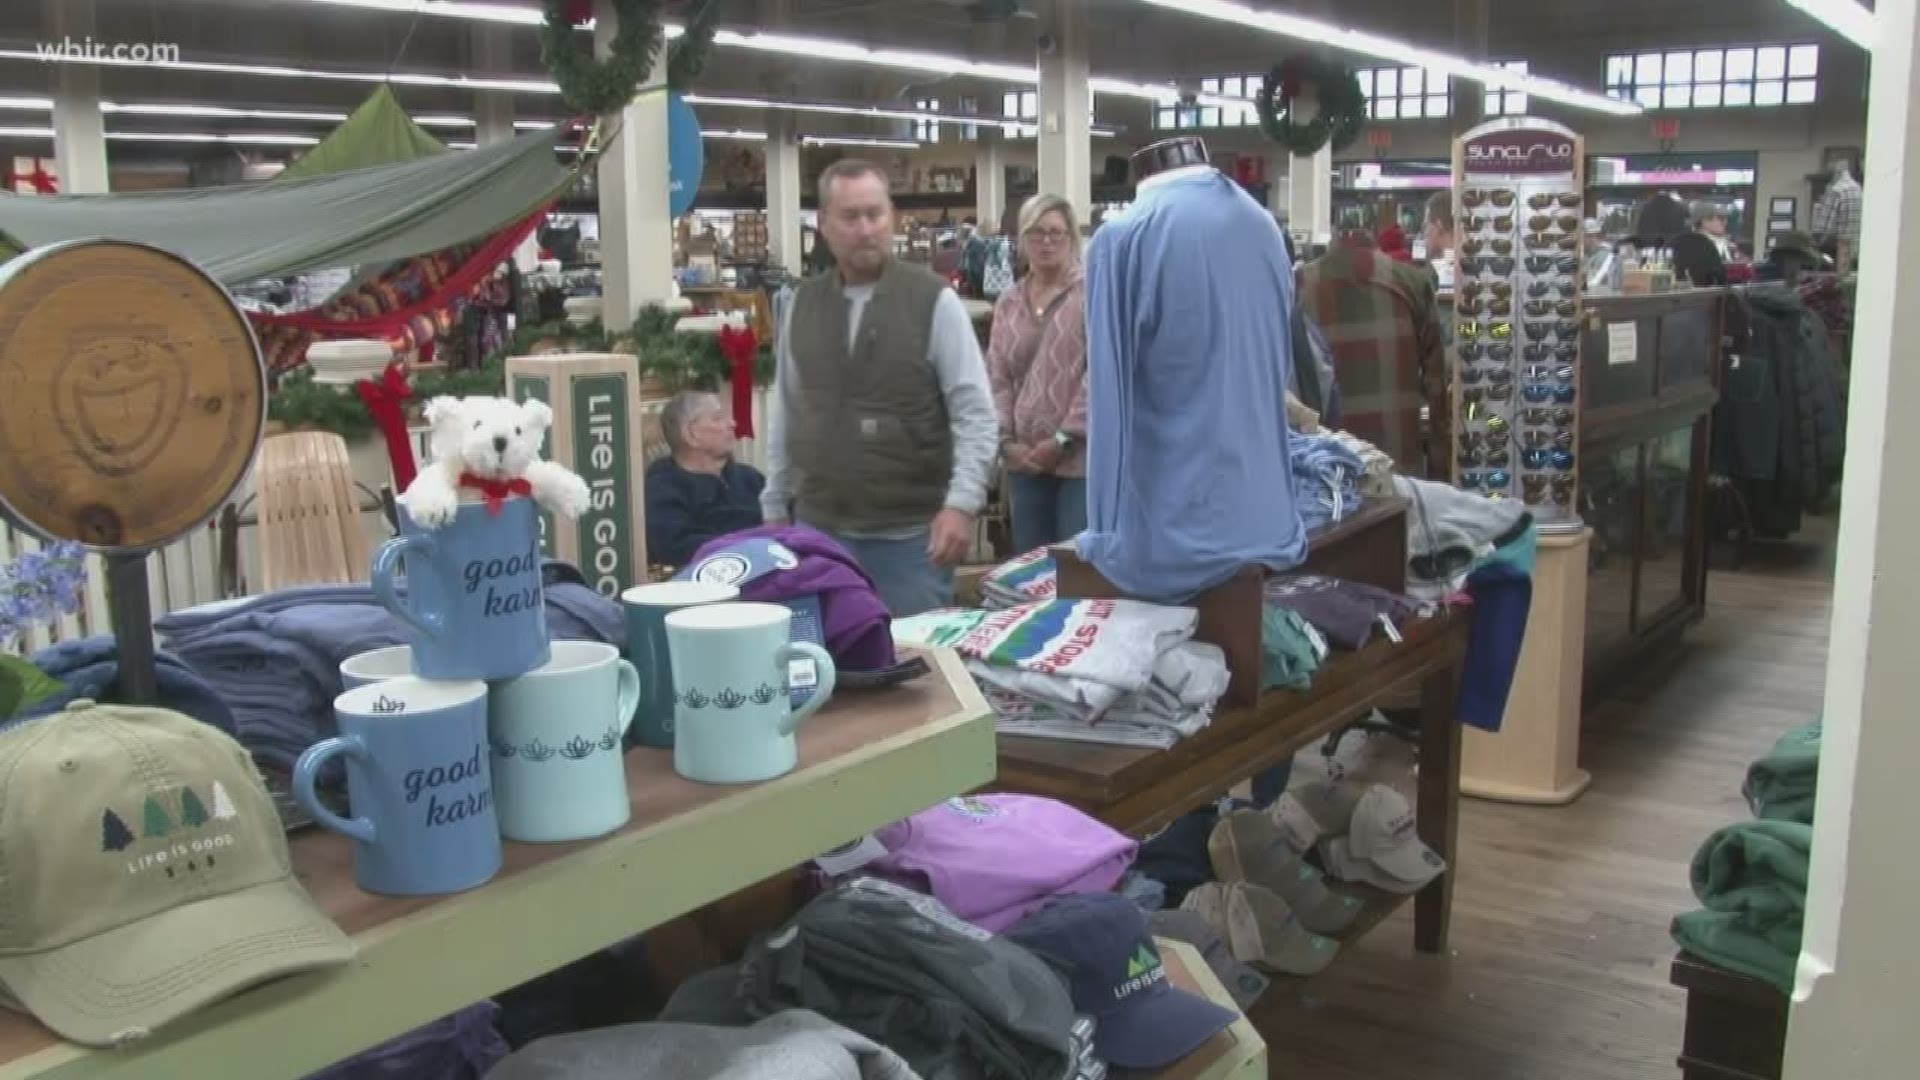 Knoxville followed Black Friday with Small Business Sunday -- a chance for local artisans and businesses to show off their products.